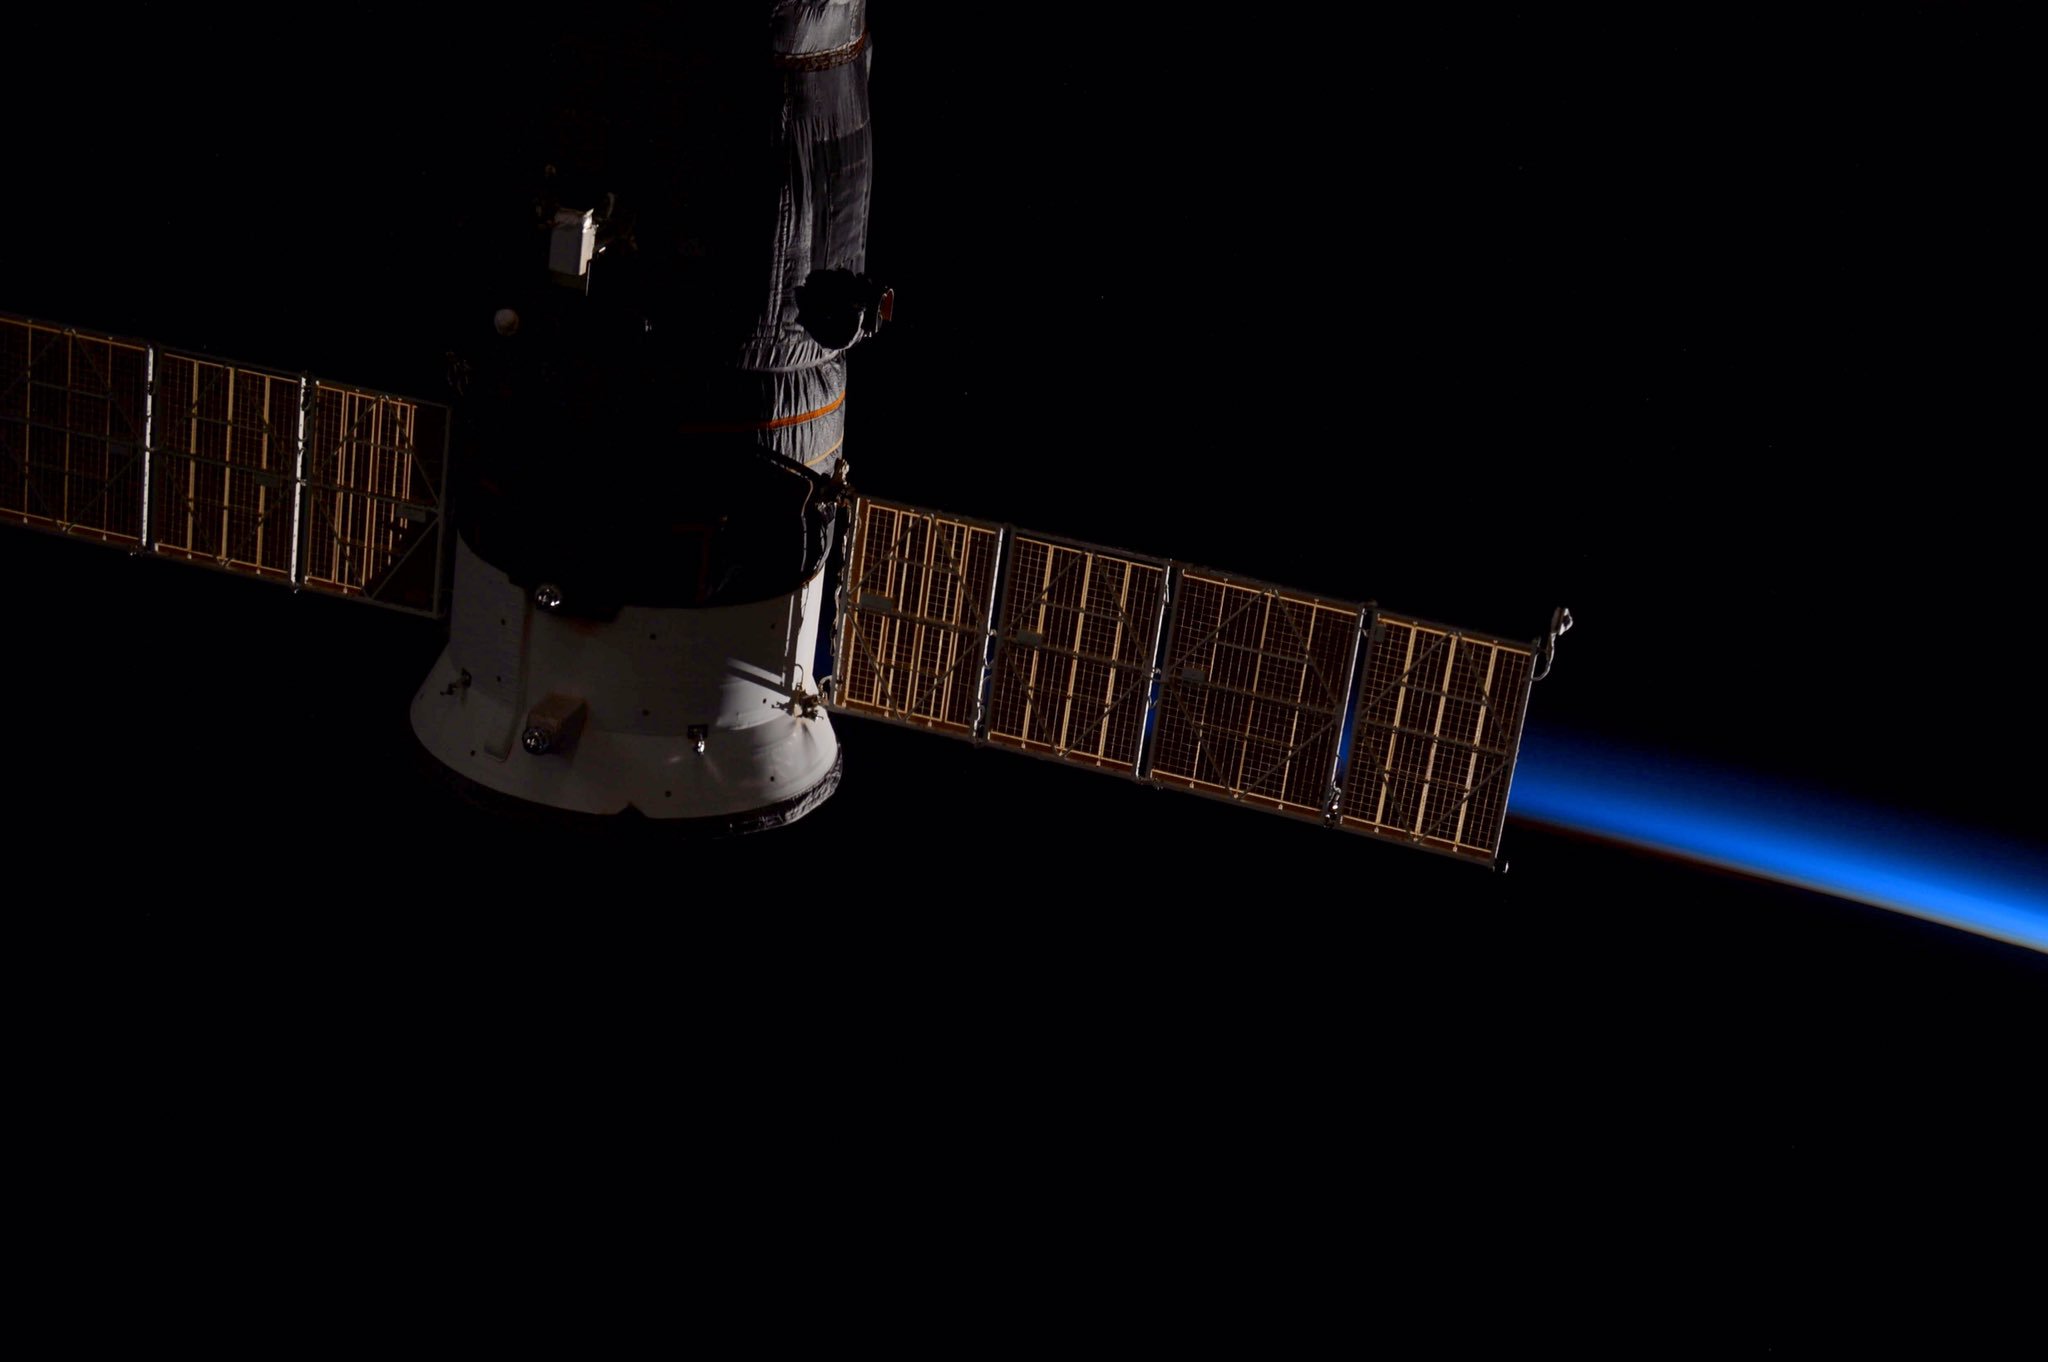 "Skimming the horizon at sunset" was Kate Rubins' description of this remarkable image of Soyuz MS-01, posted on Twitter on Monday, 24 October. Rubins and her crewmates Anatoli Ivanishin and Takuya Onishi will return home aboard this spacecraft over the coming weekend. Photo Credit: NASA/Kate Rubins/Twitter